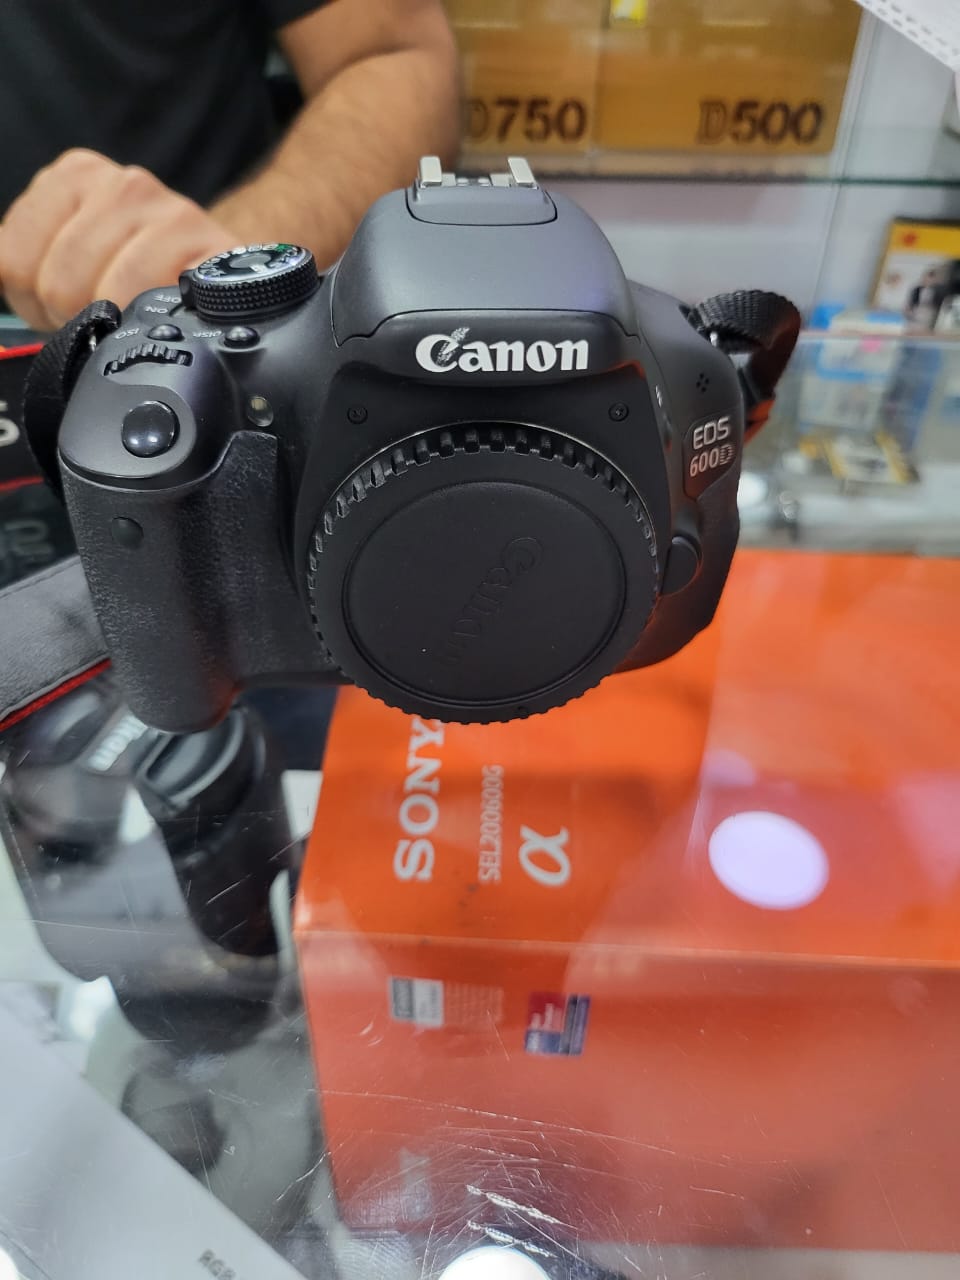 Open Box Canon EOS 600D 18MP Digital SLR Camera Black with Body Only